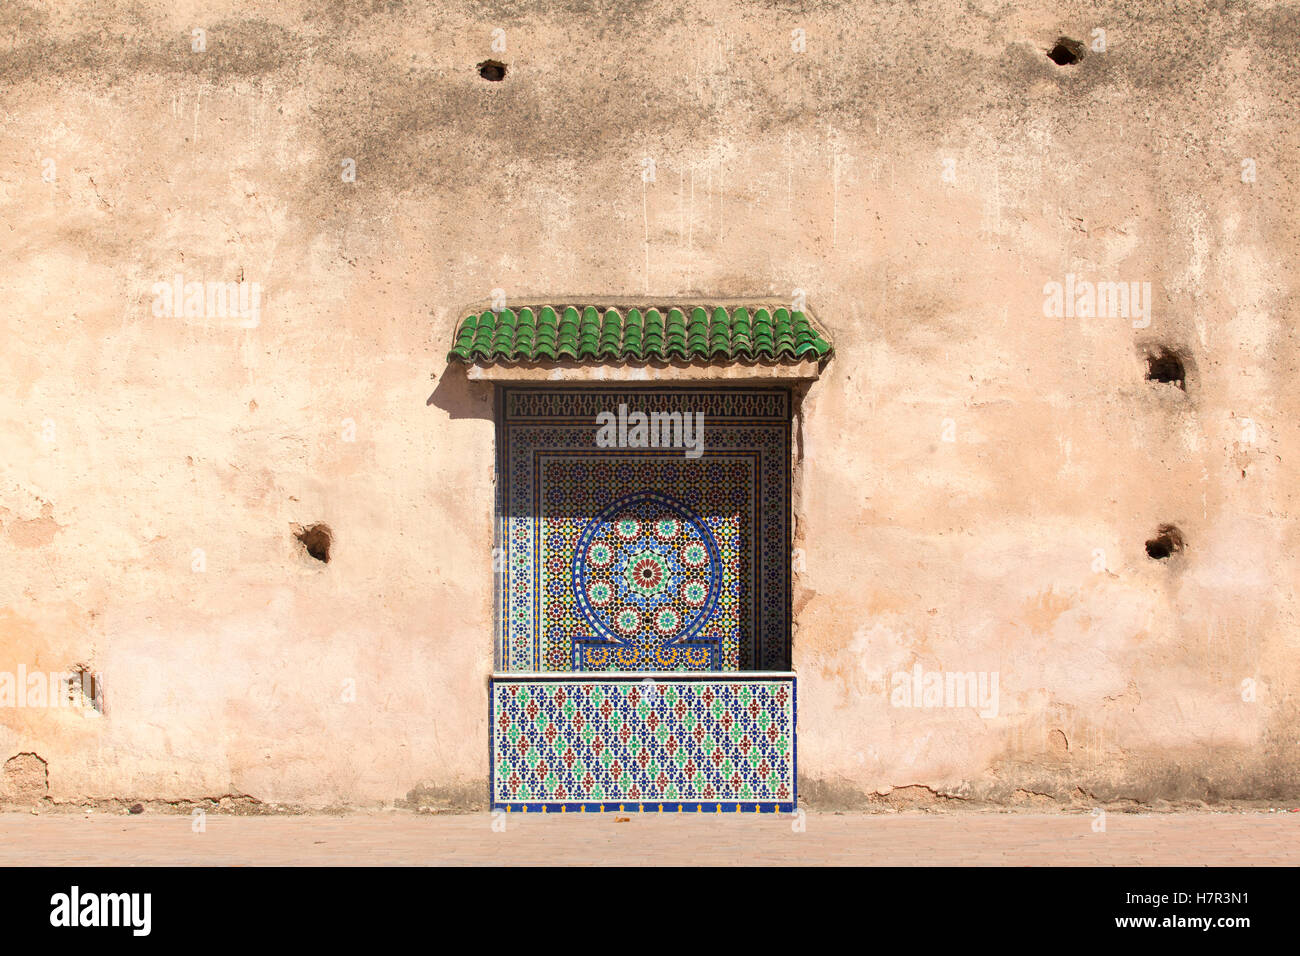 One of the colored fountains of Meknes. Morocco. Stock Photo